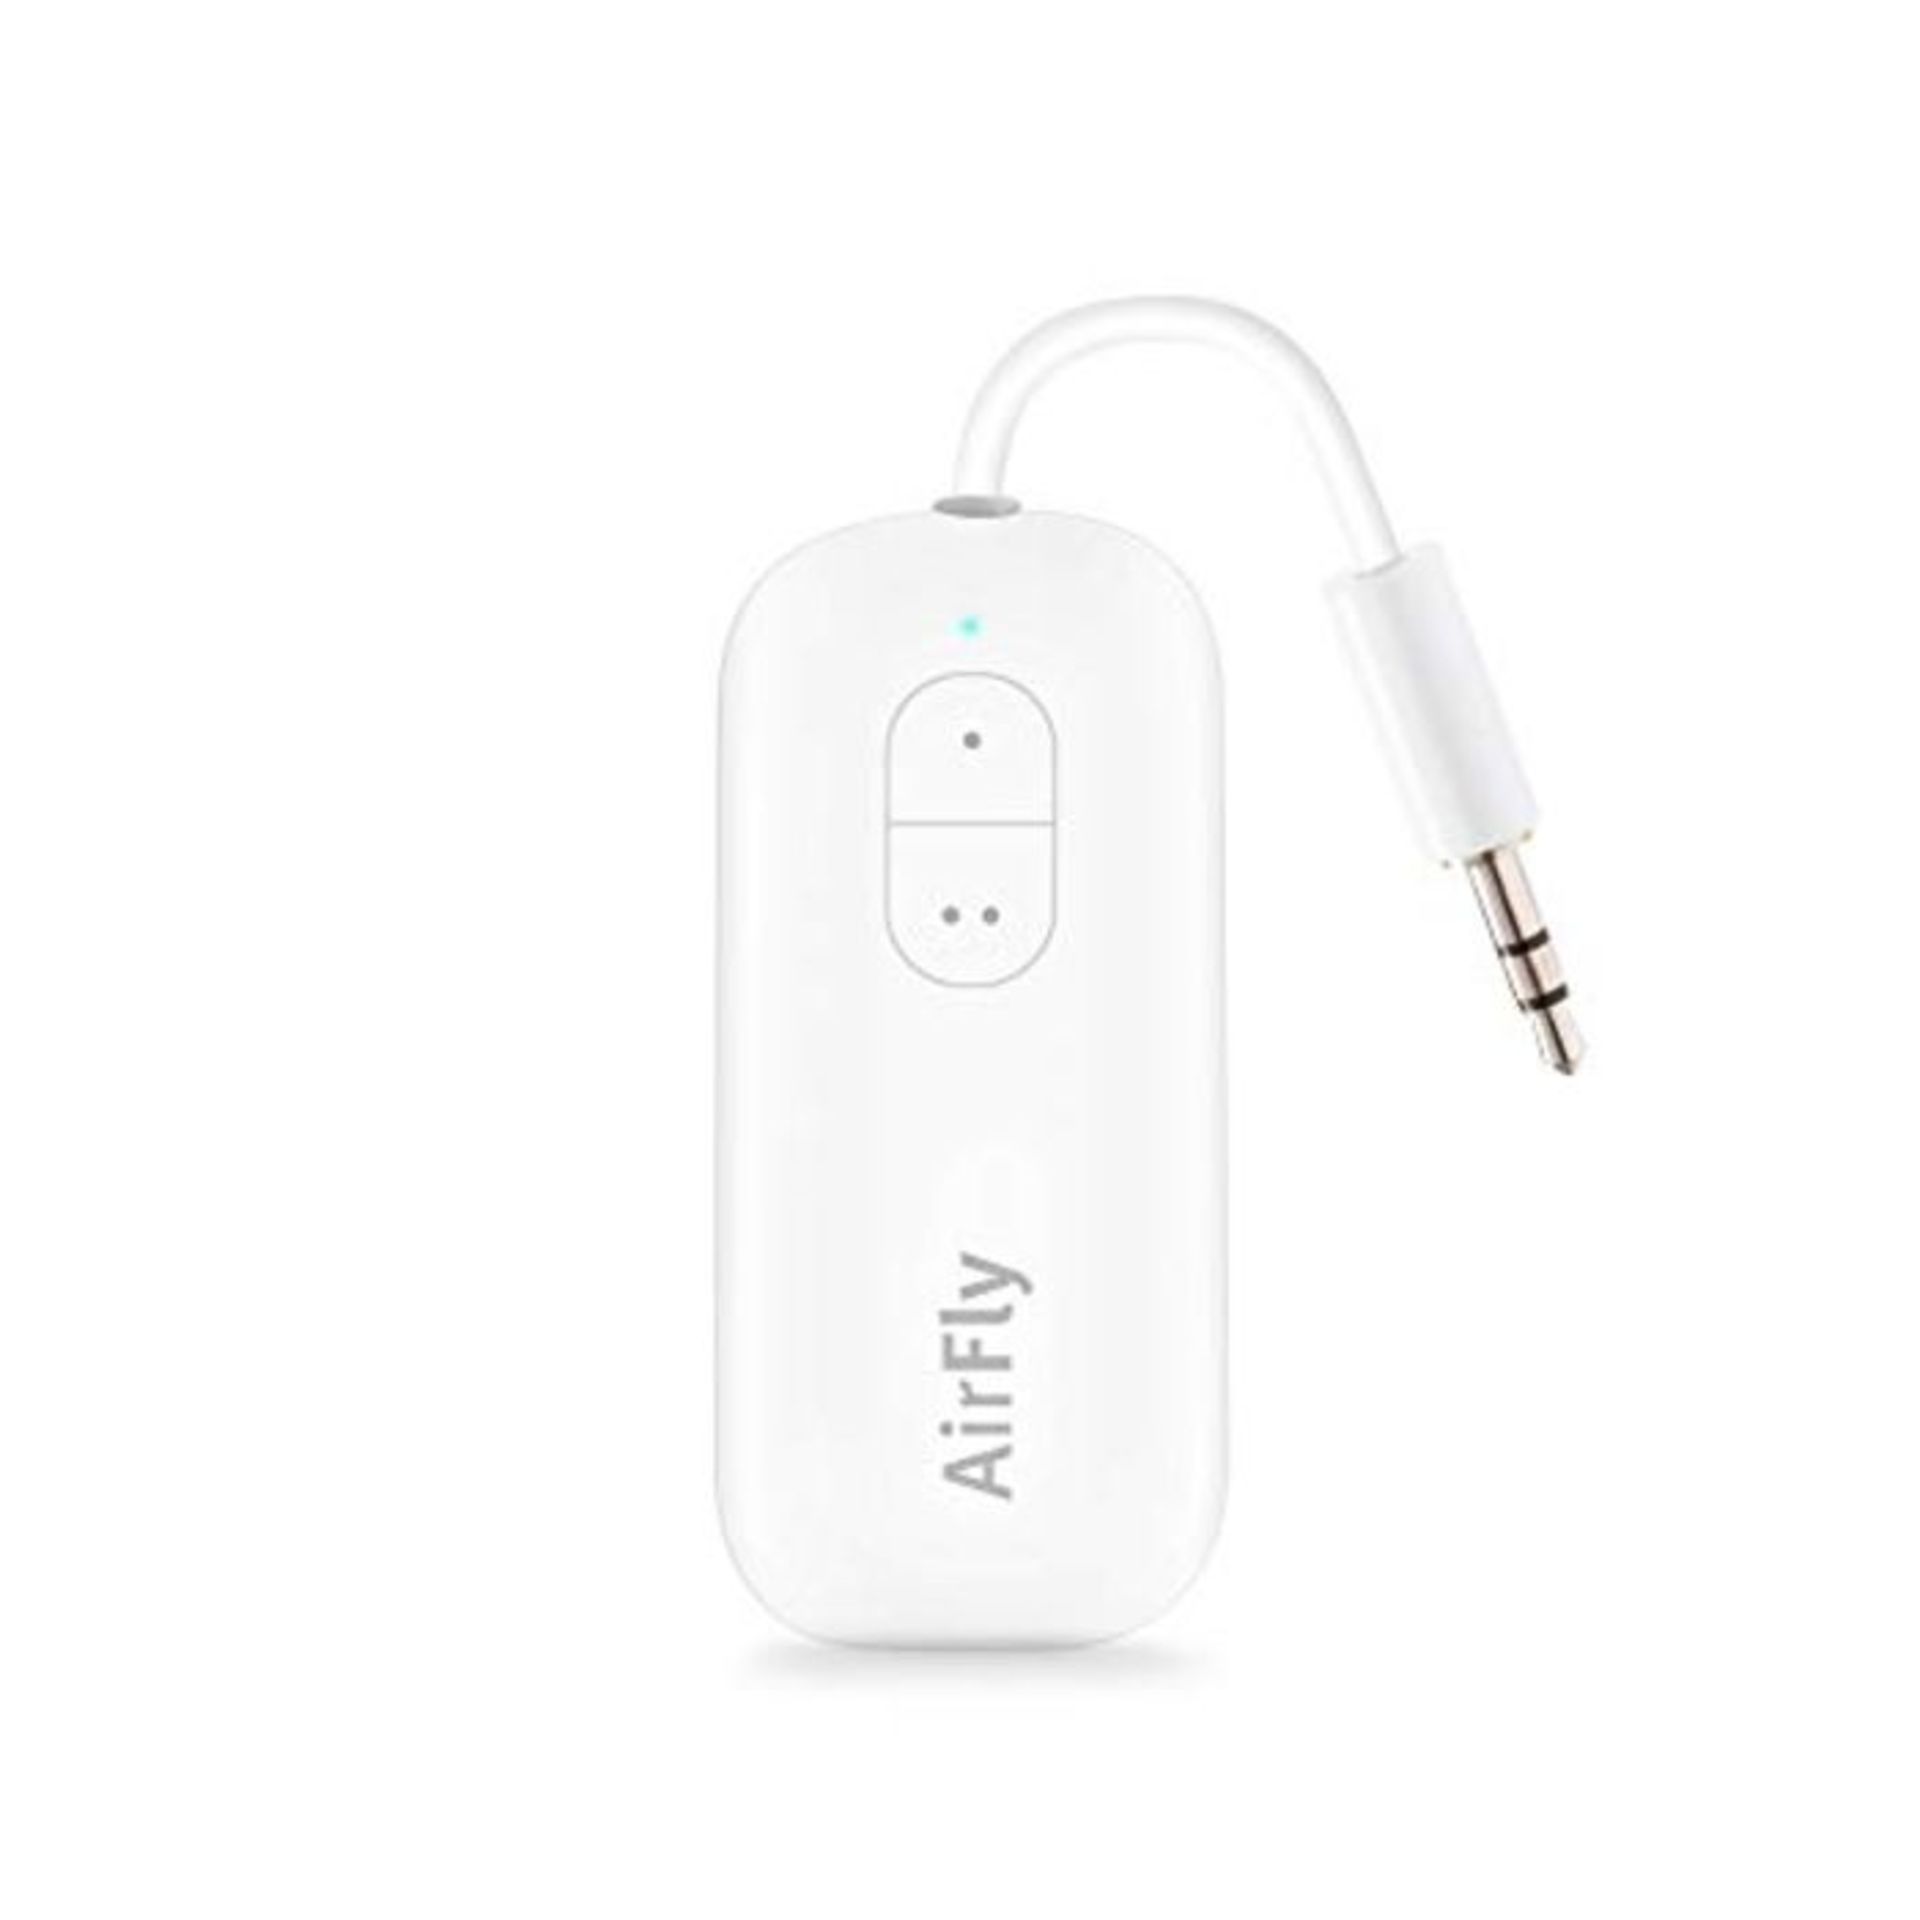 Twelve South AirFly Duo | Wireless transmitter with audio sharing for up to 2 AirPods